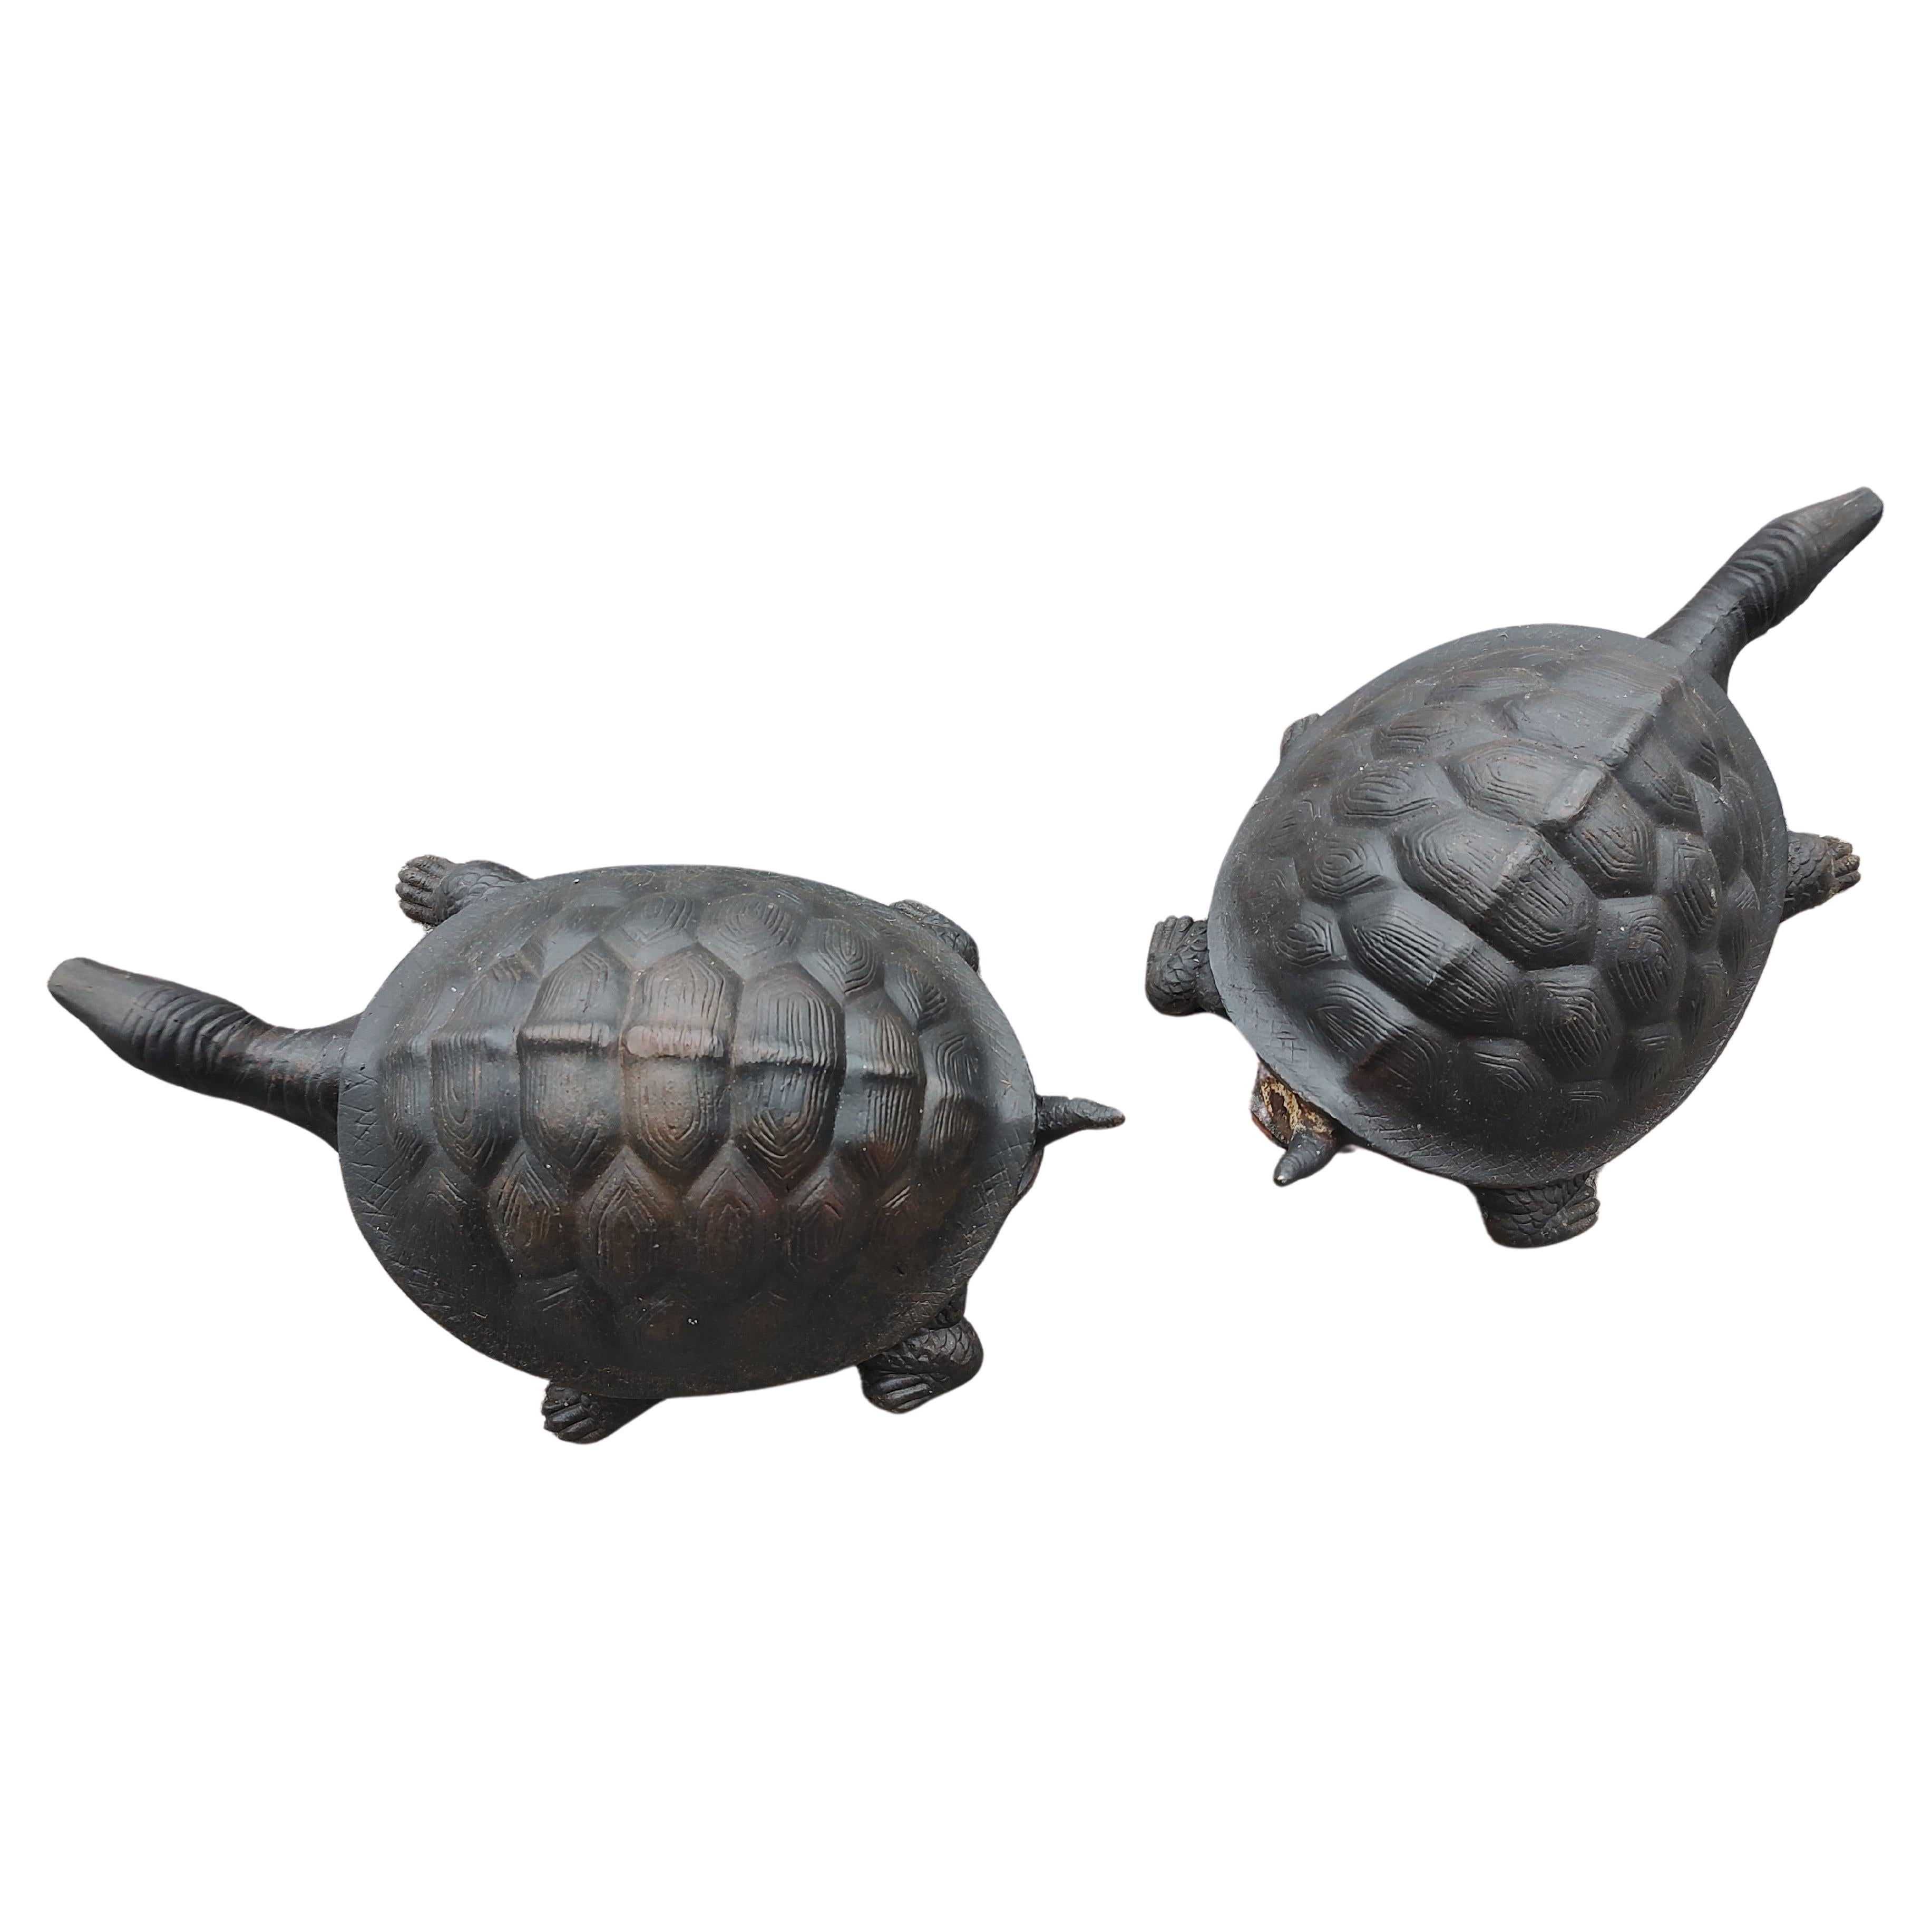 Fabulous pair of cast iron garden turtle fountains. Each turtle measures at 25 x 14 x 10h inches. Hefty in weight, very stable. Copper tubing for the water spout. Great detailed castings and in wonderful condition. Priced and sold individually.